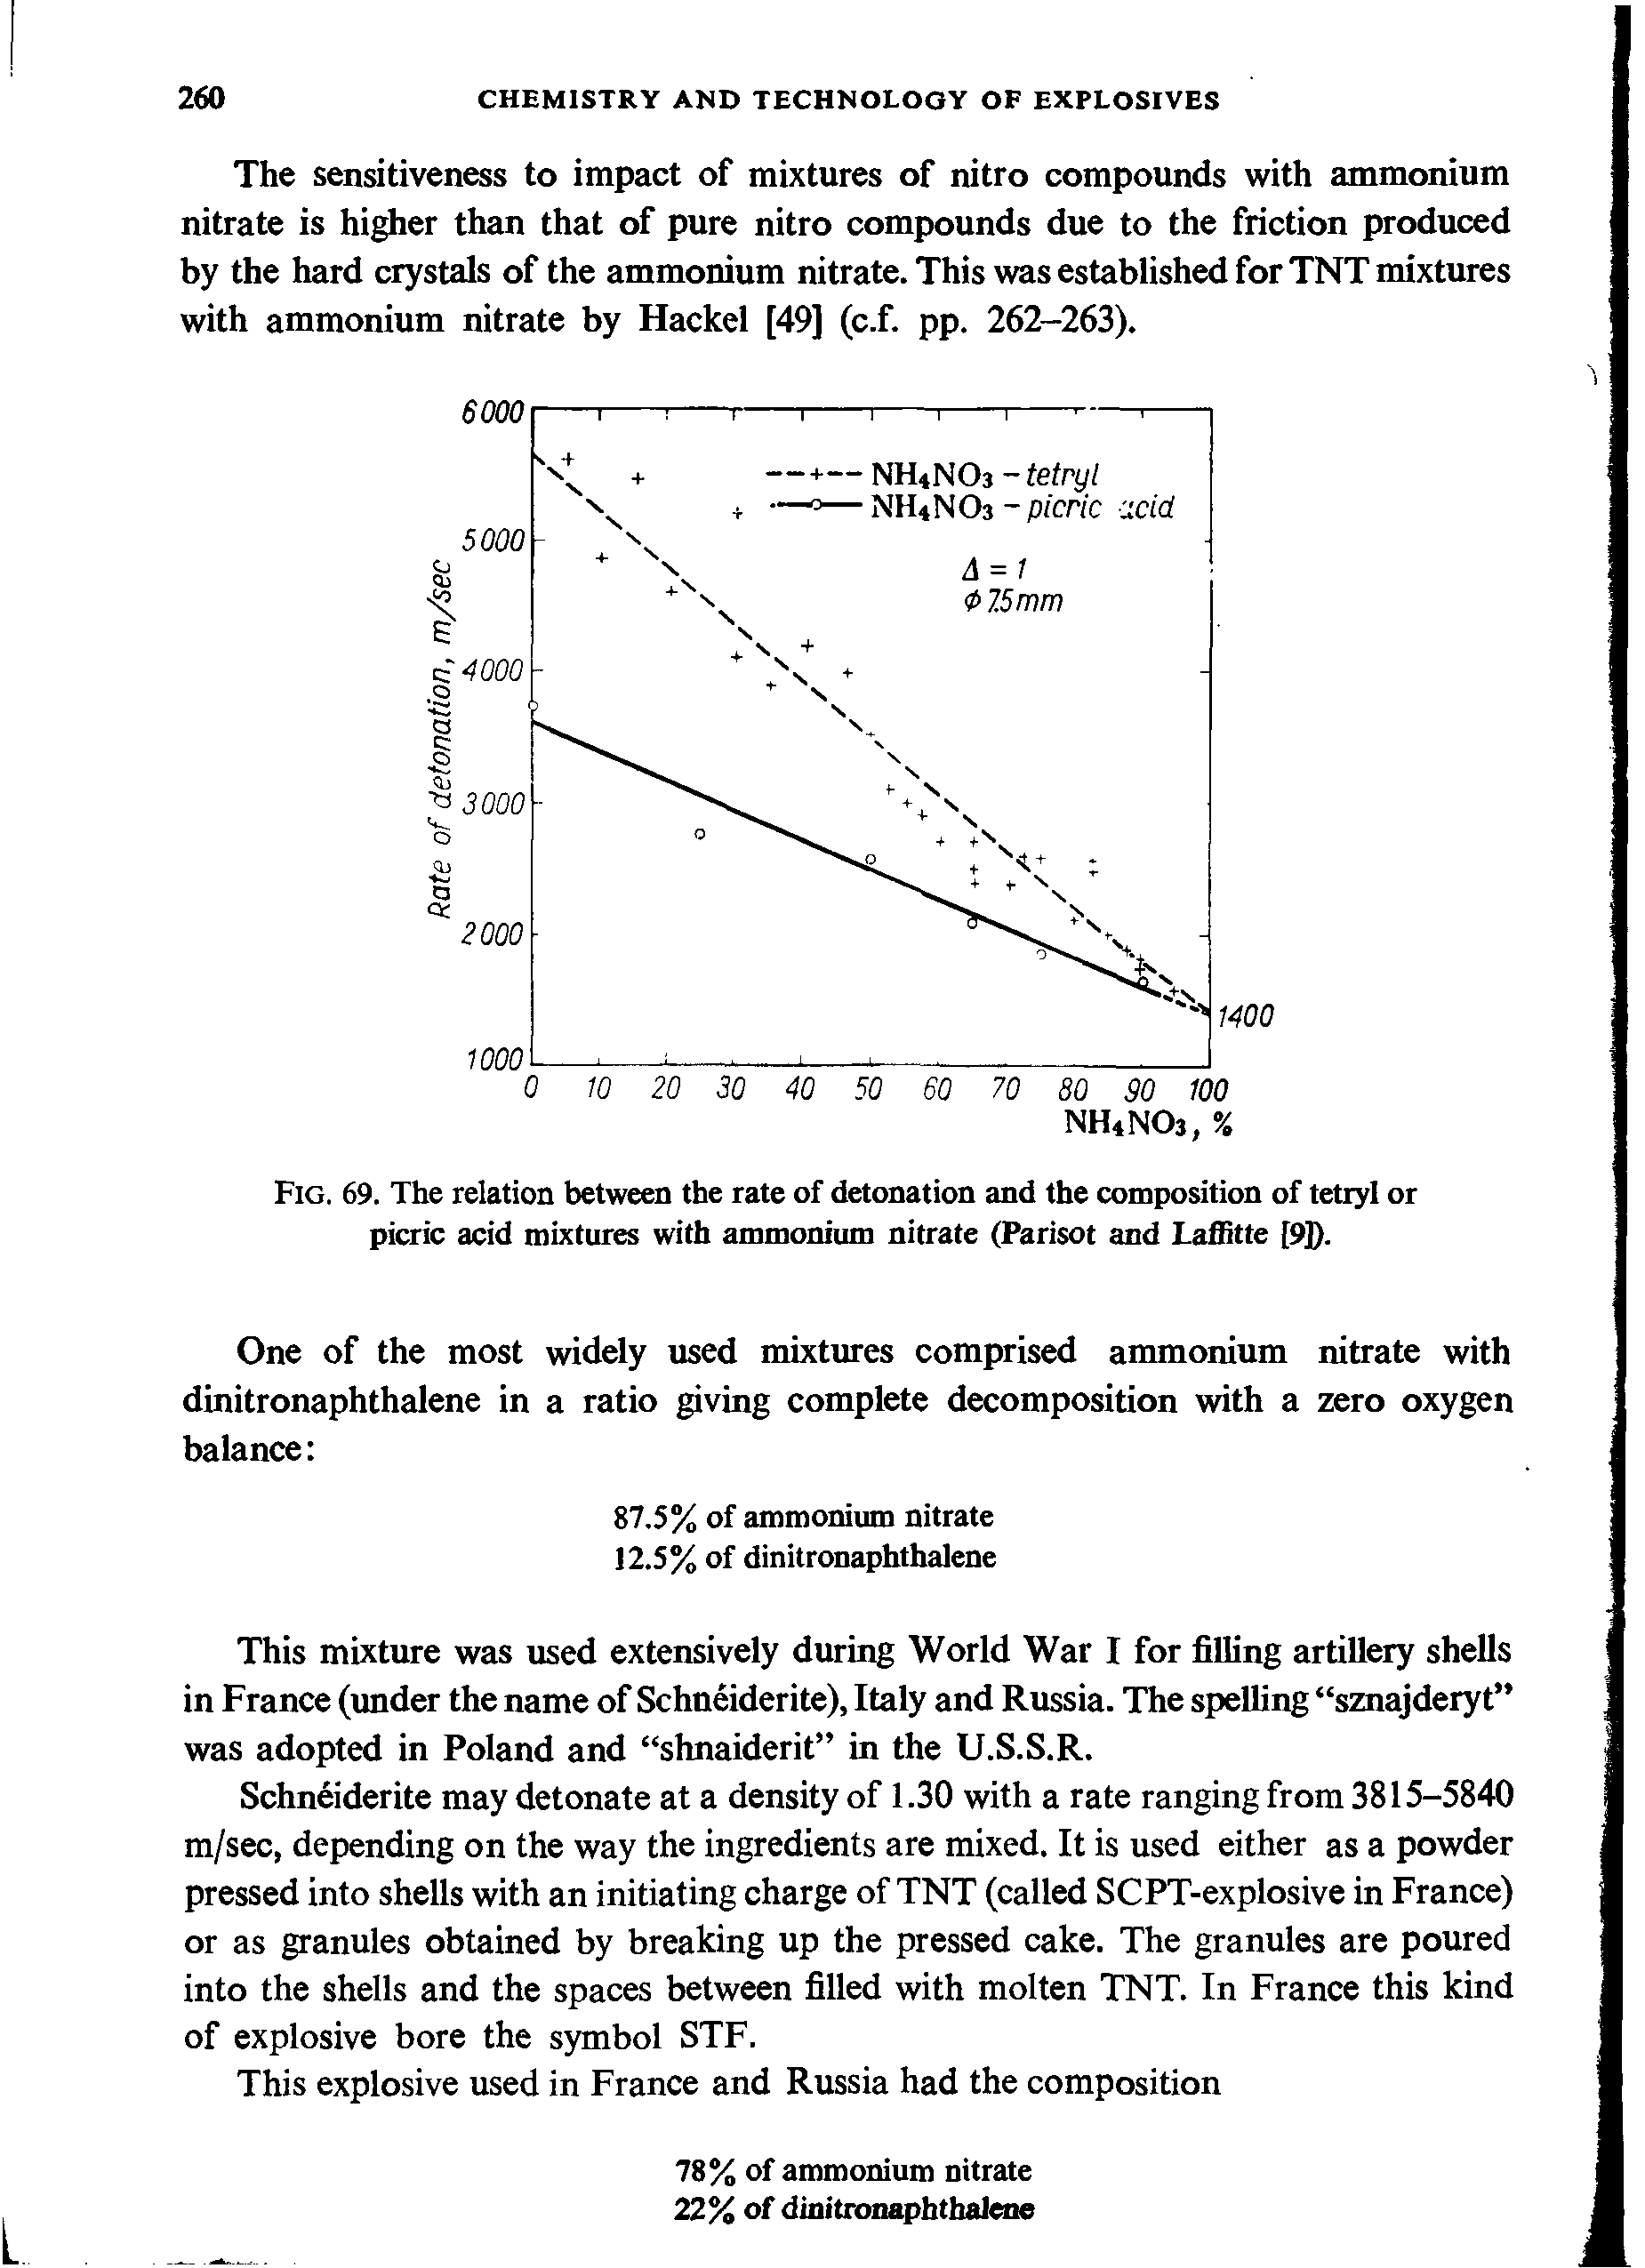 Fig. 69. The relation between the rate of detonation and the composition of tetryl or picric acid mixtures with ammonium nitrate (Parisot and Laffitte [9]).